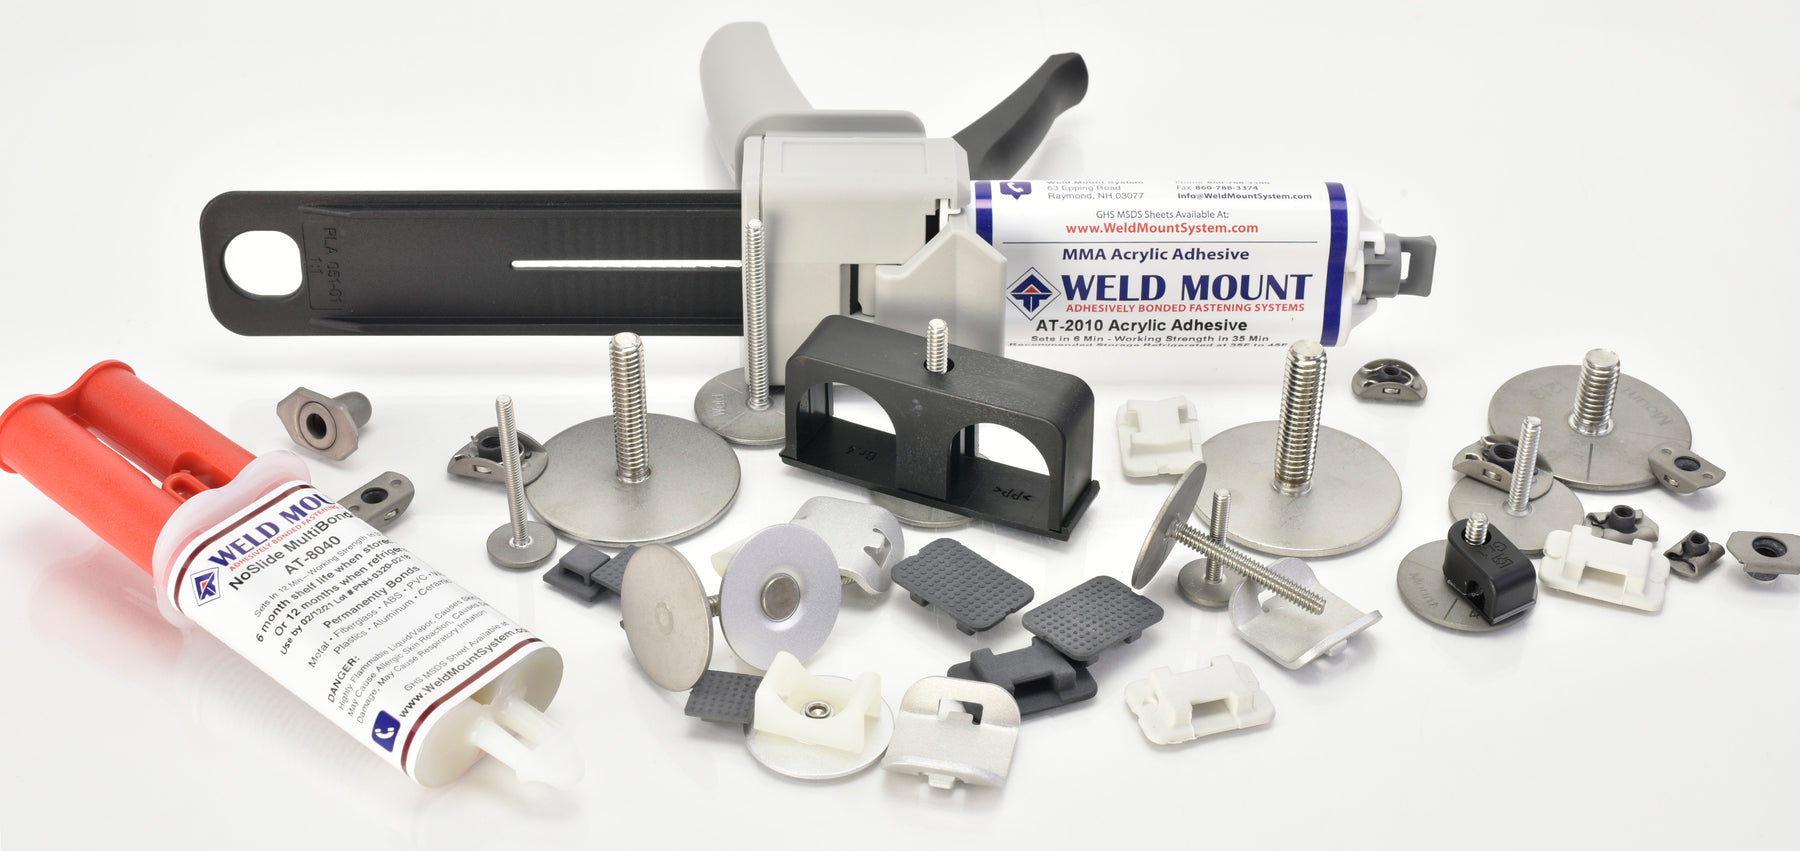 What is Weld Mount?